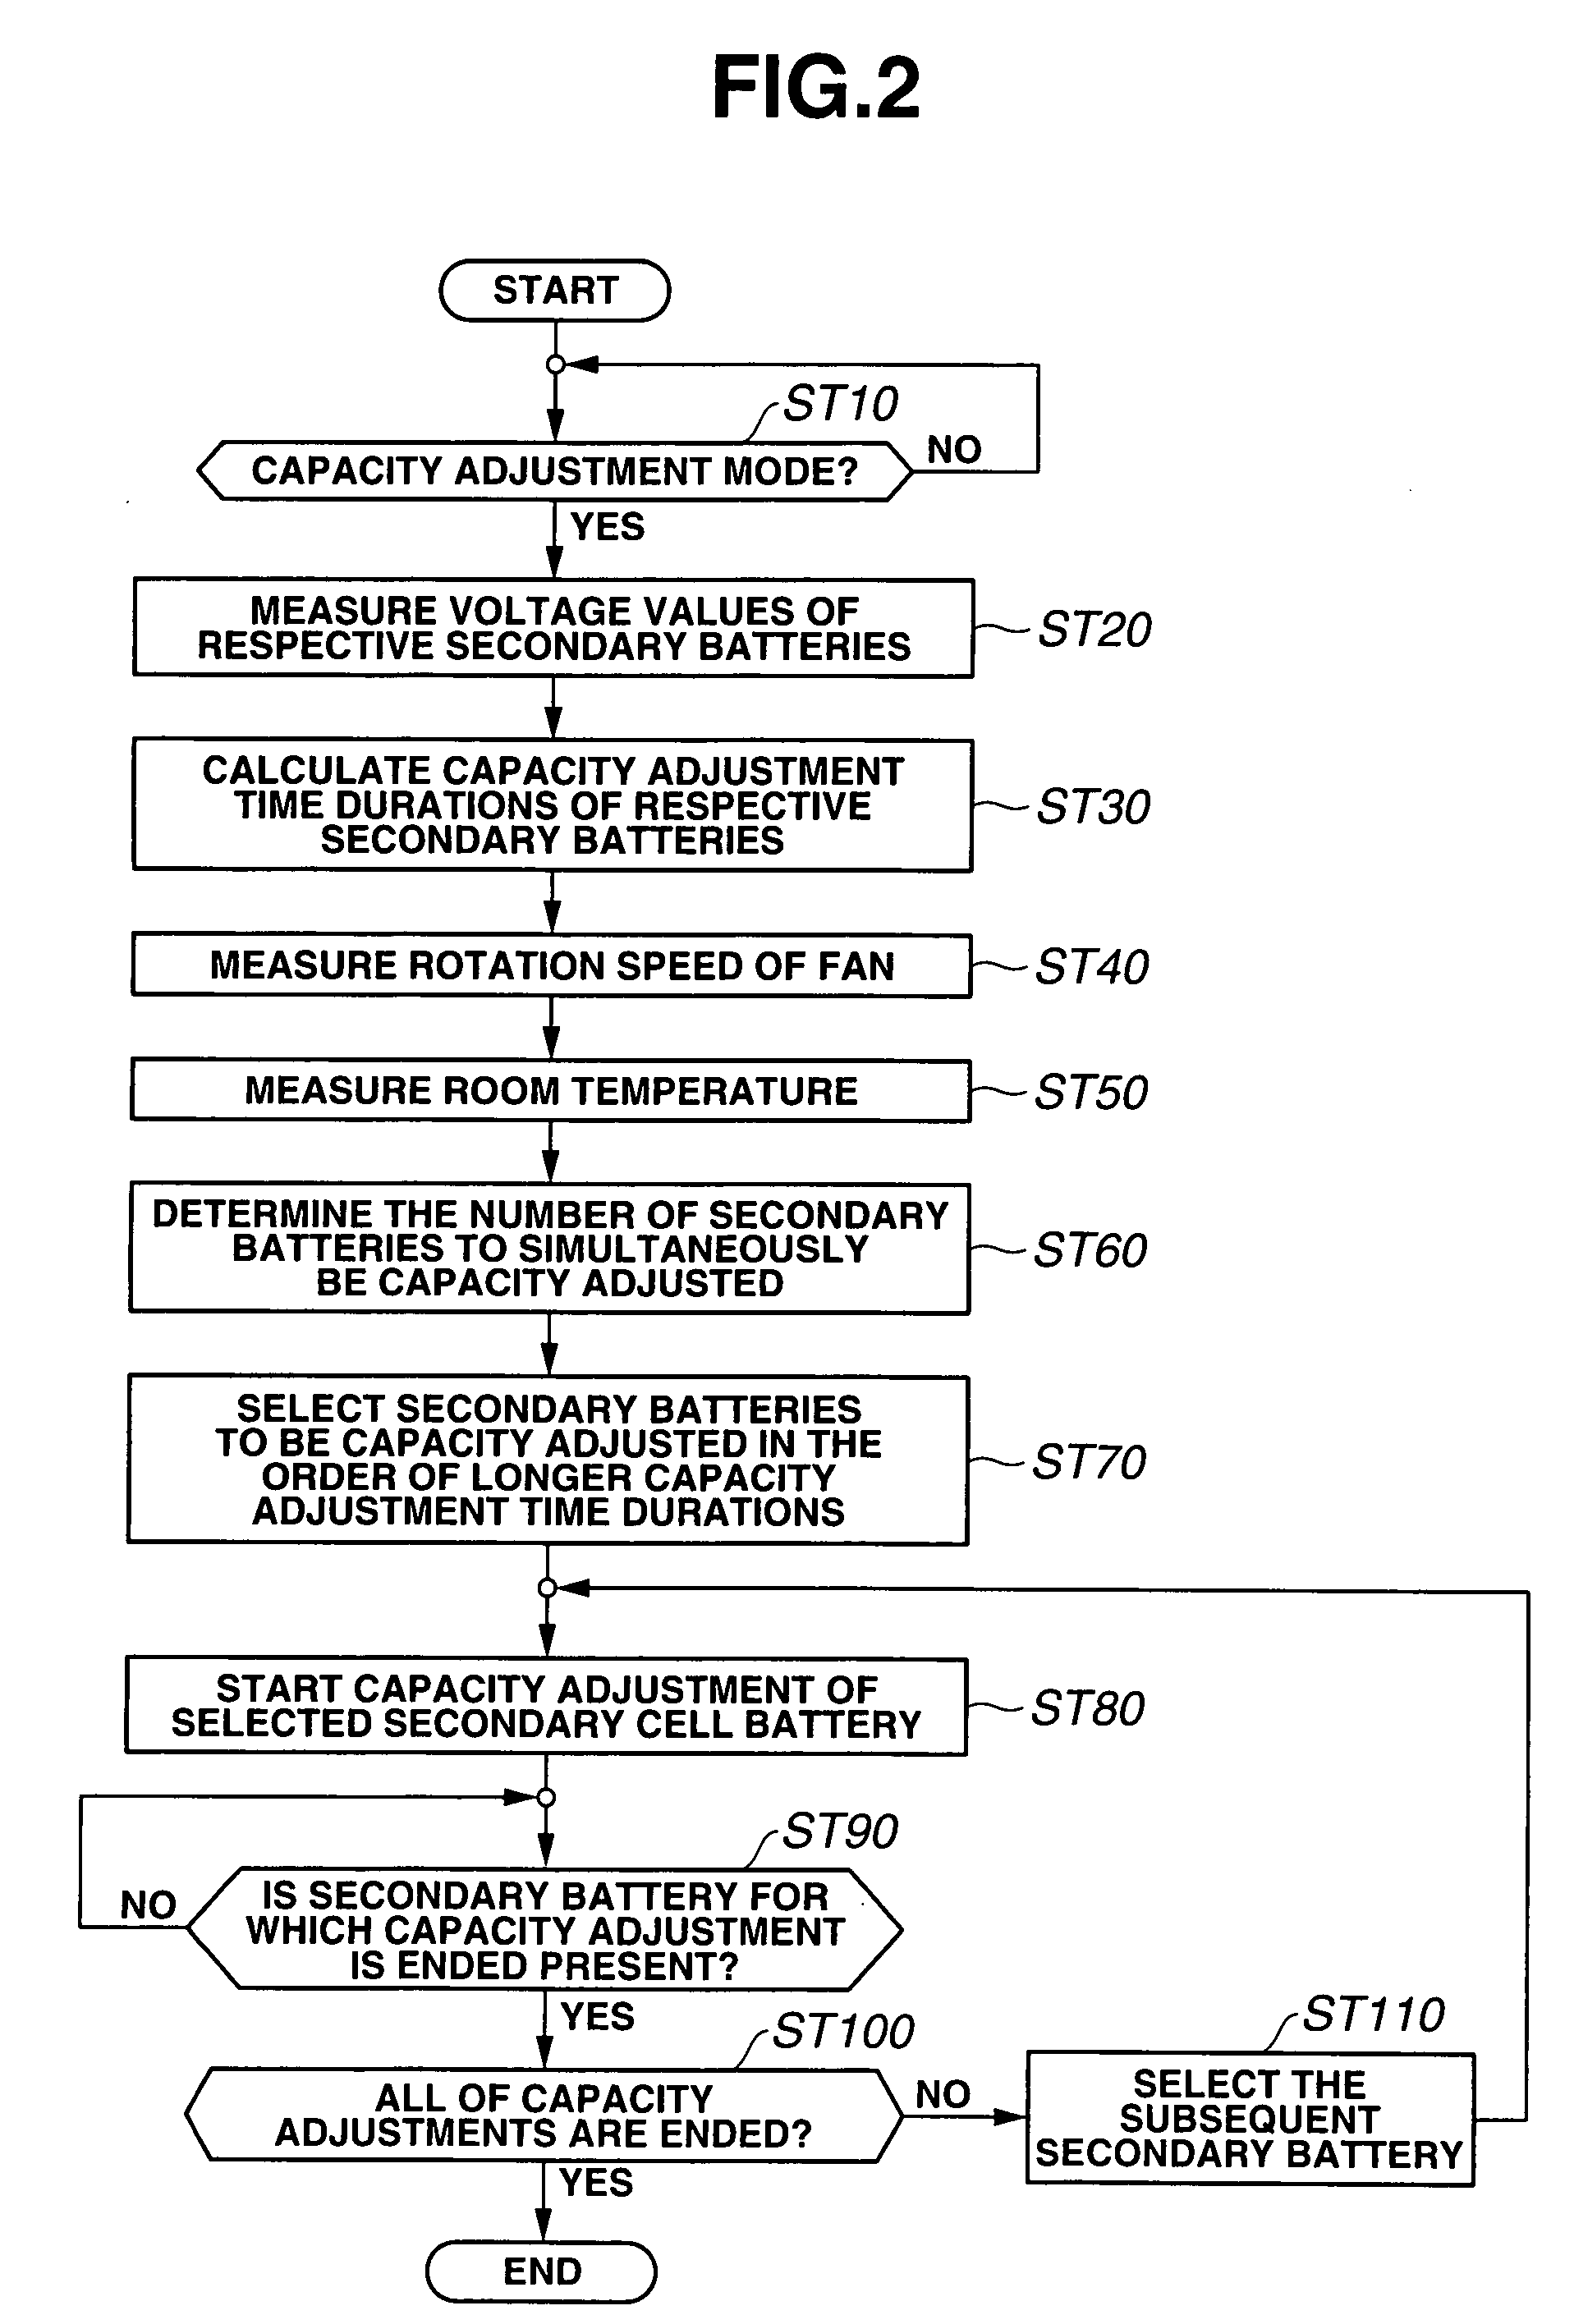 Capacity adjustment apparatus and method of secondary battery